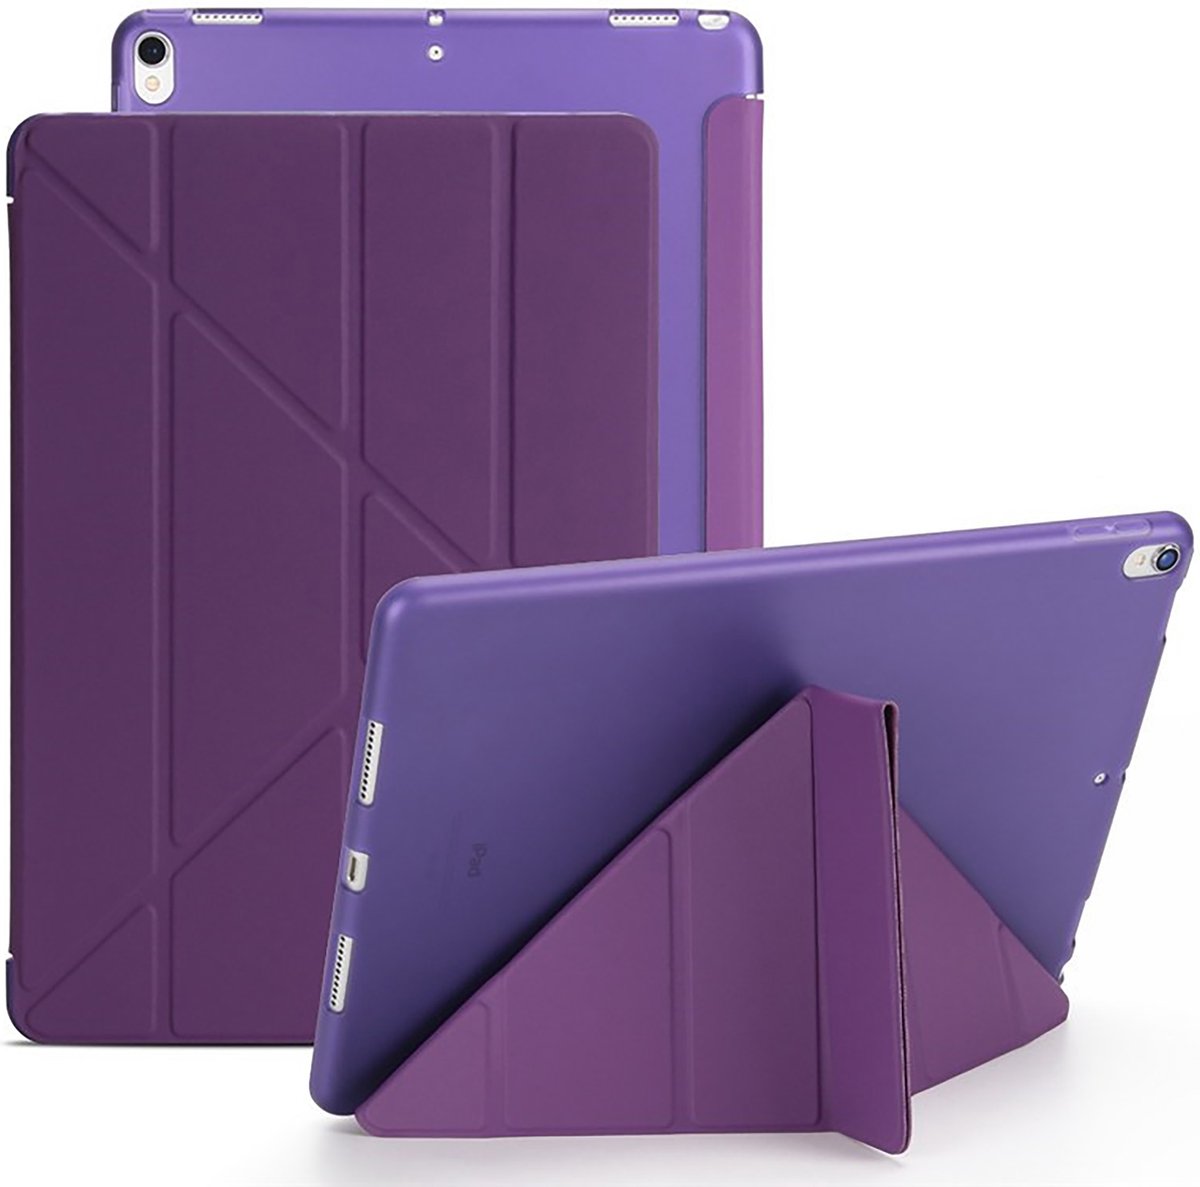 Tablet Hoes geschikt voor iPad Hoes 2019 - 7e Generatie - 10.2 inch - Smart Cover - A2200 - A2198 - A2197 - Paars